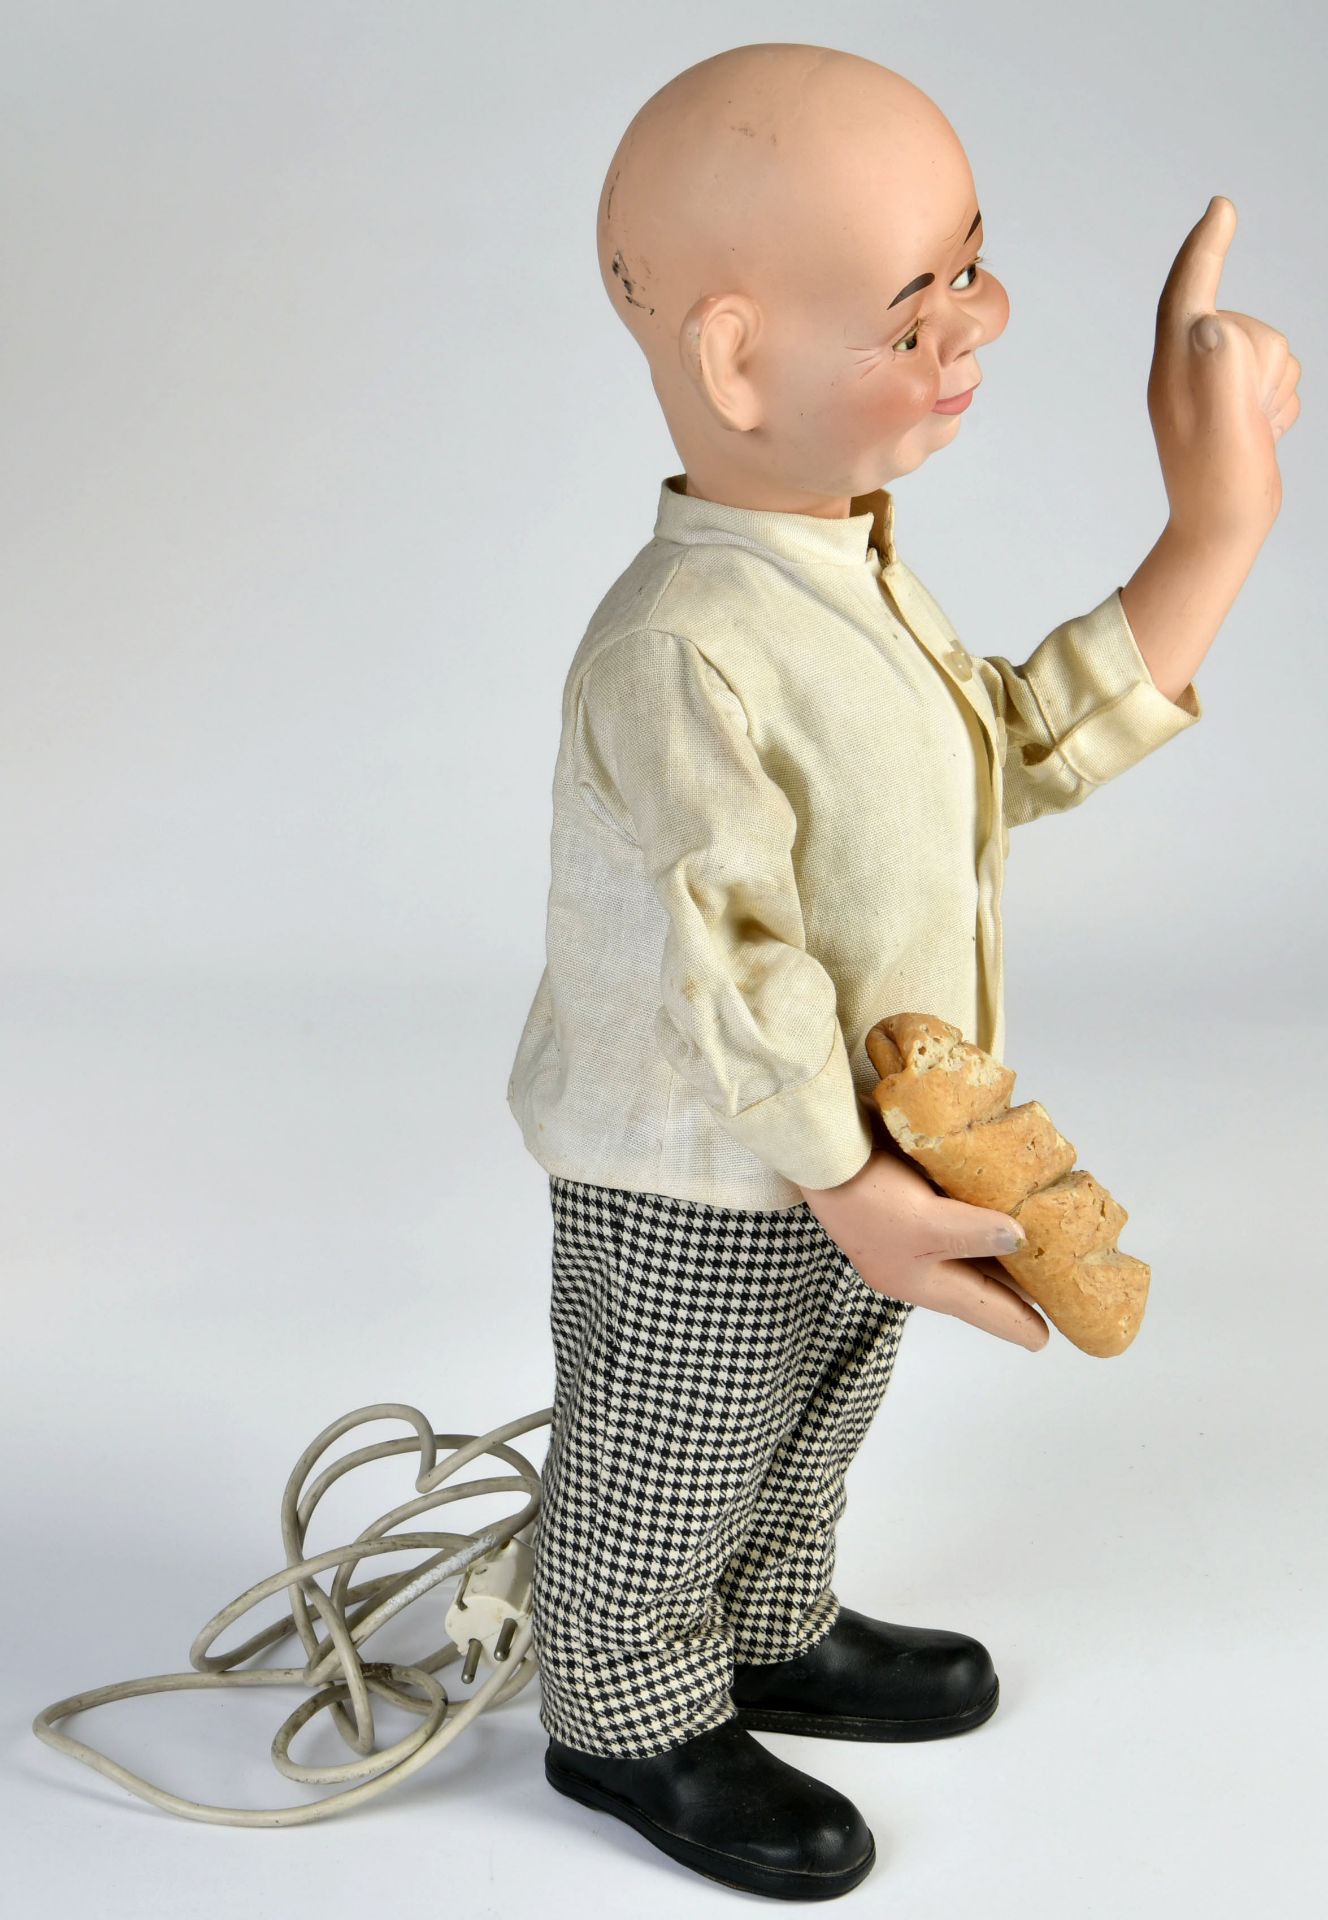 Advertising automaton "baker", bobblehead with limber eyes, 63 cm, electric drive ok, no shipping, Z - Image 2 of 2